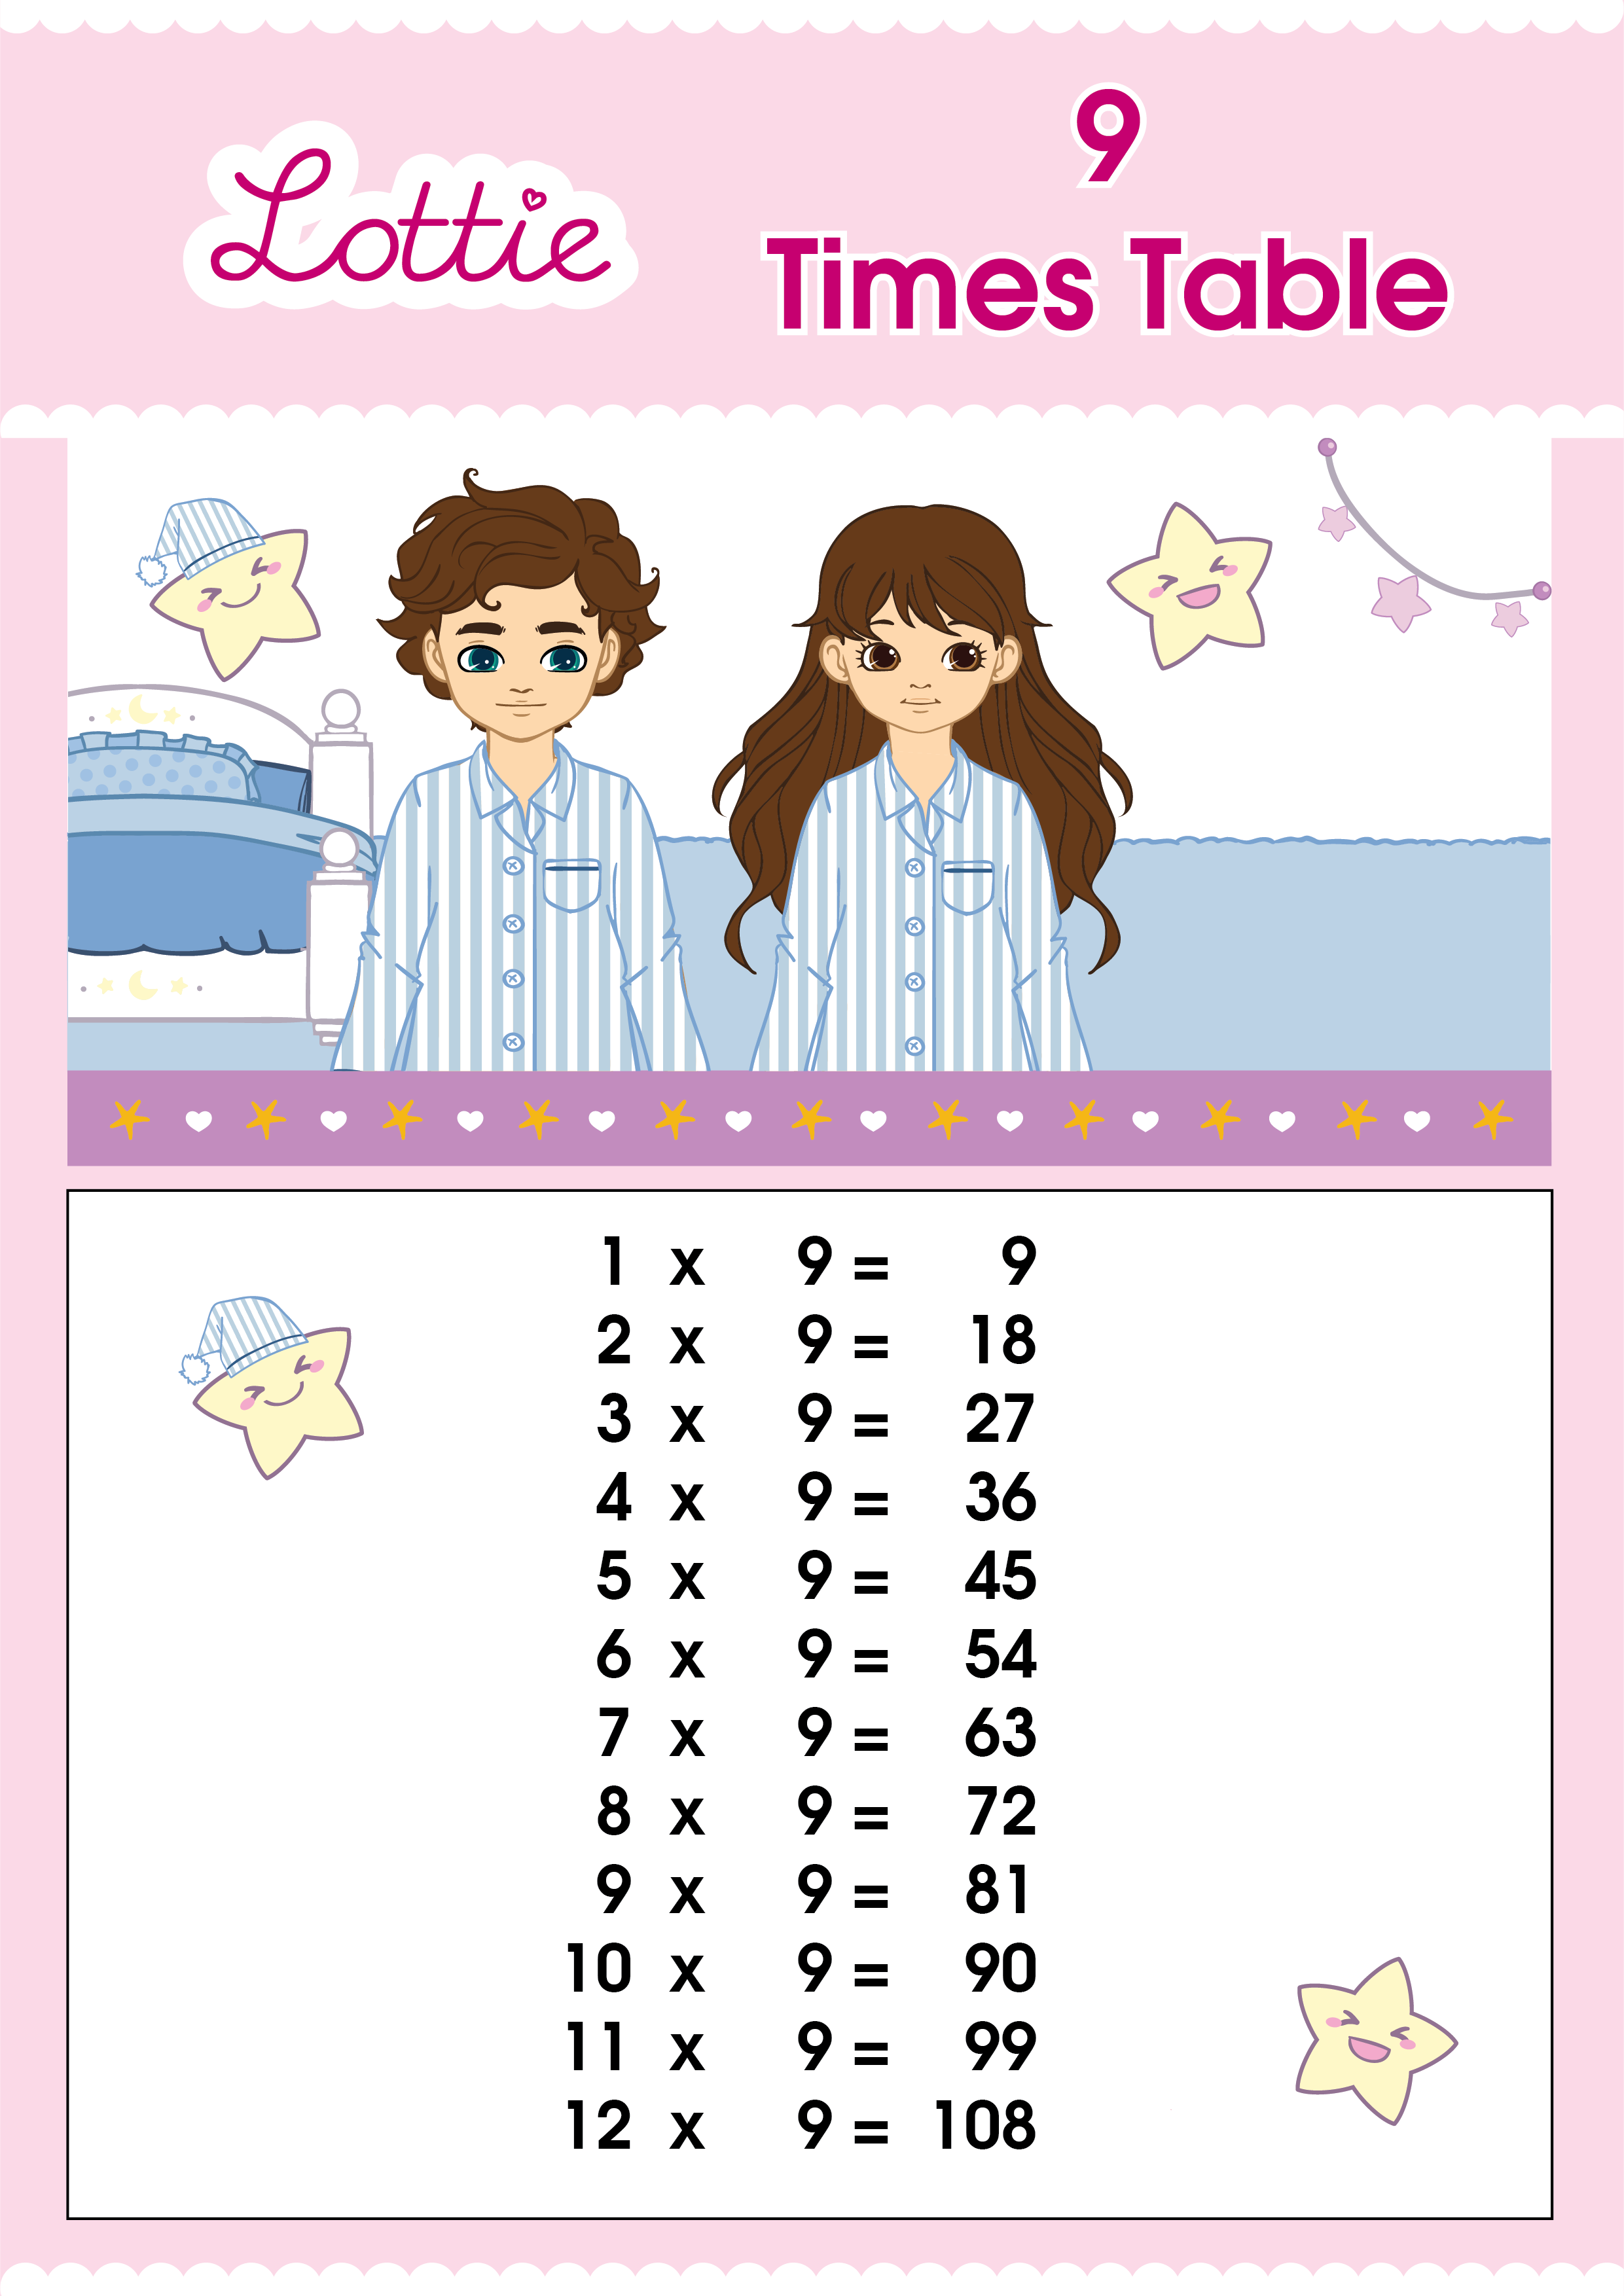 9times table chart